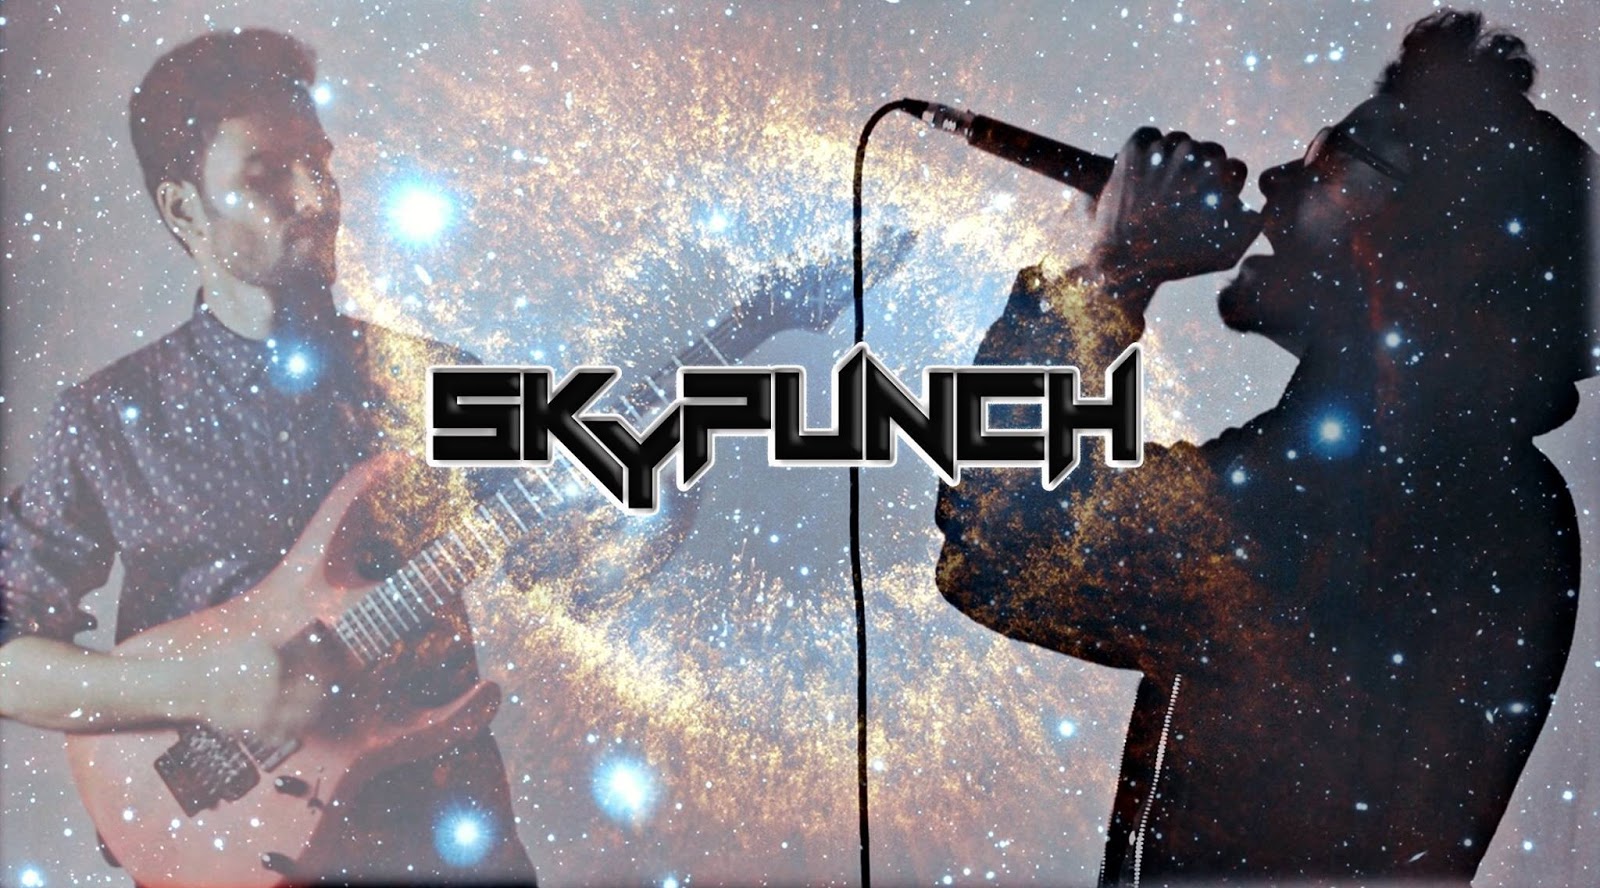 SKYPUNCH - Release Video For New Single 